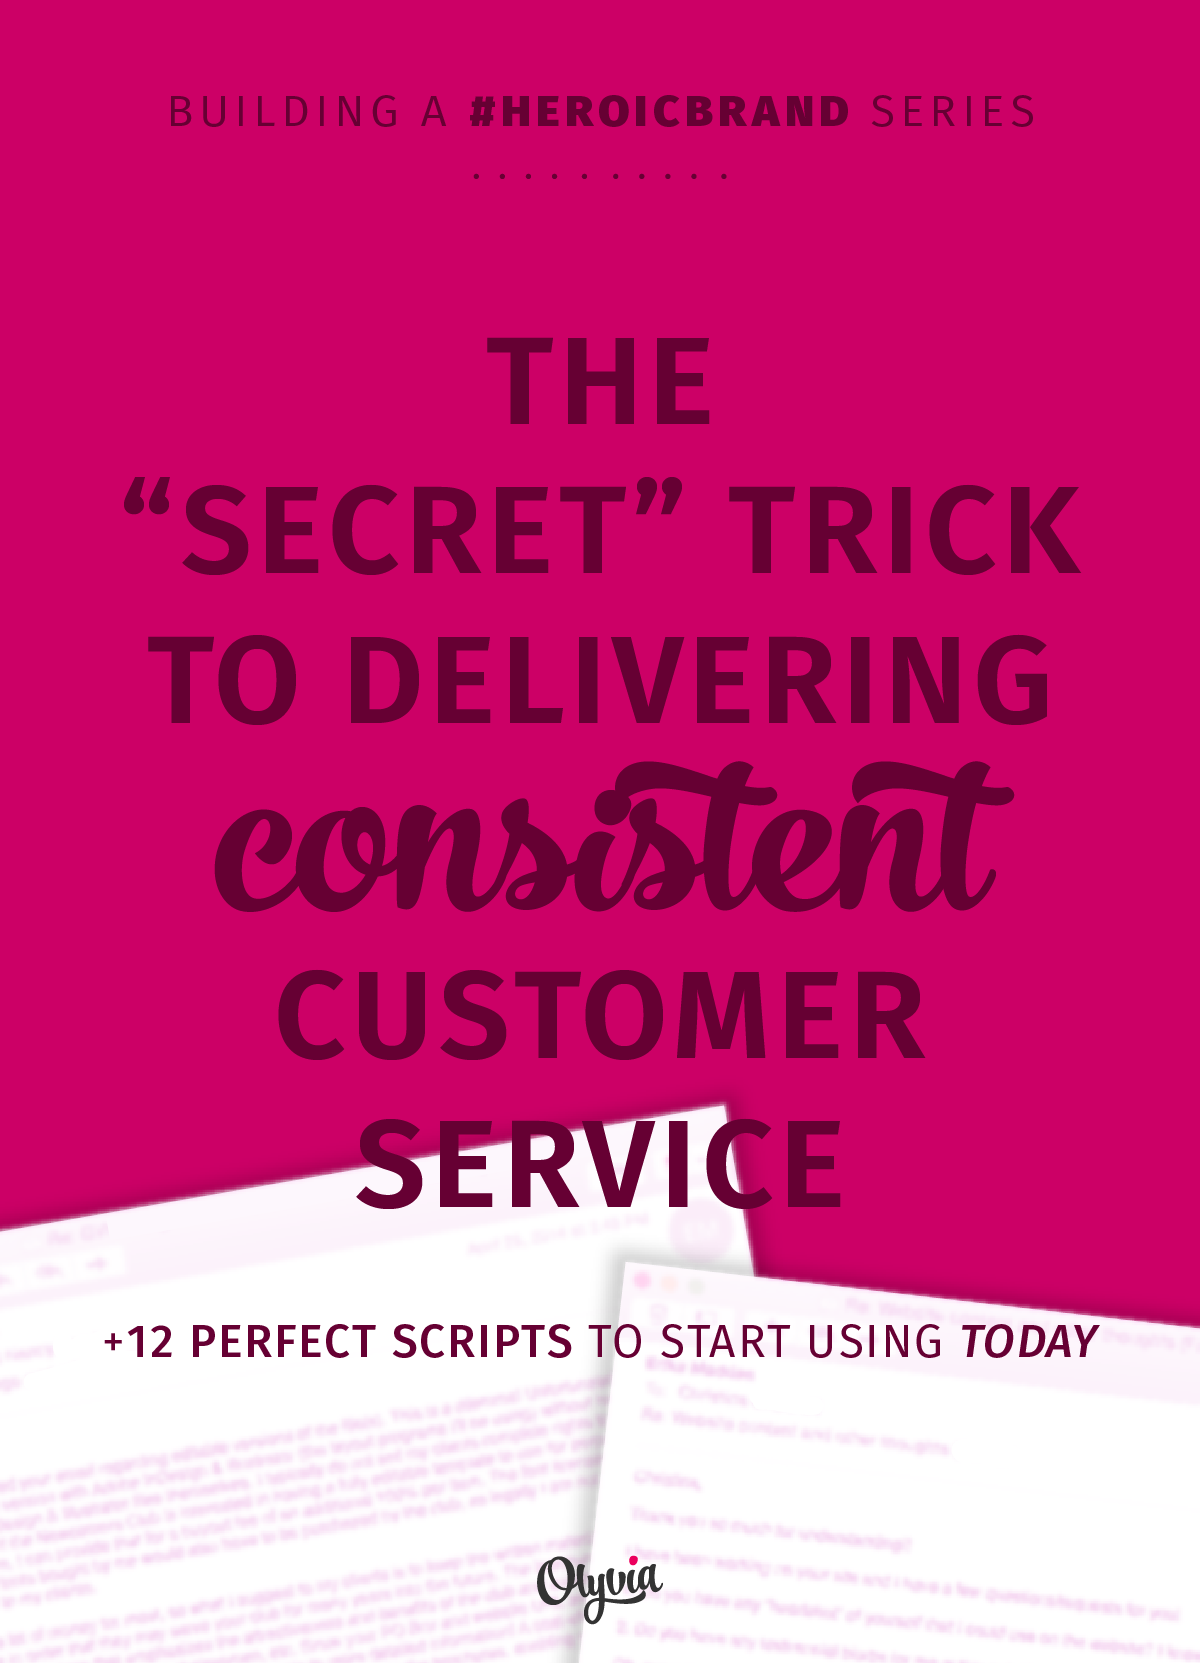 The "secret" to consistent customer service online! This trick is used by big politicians + successful companies to wow their customers EVERY time -- and it's ideal for busy solo business owners, too! Implement it and you'll be faster + better at giving people the customer experience they hope for with your biz.